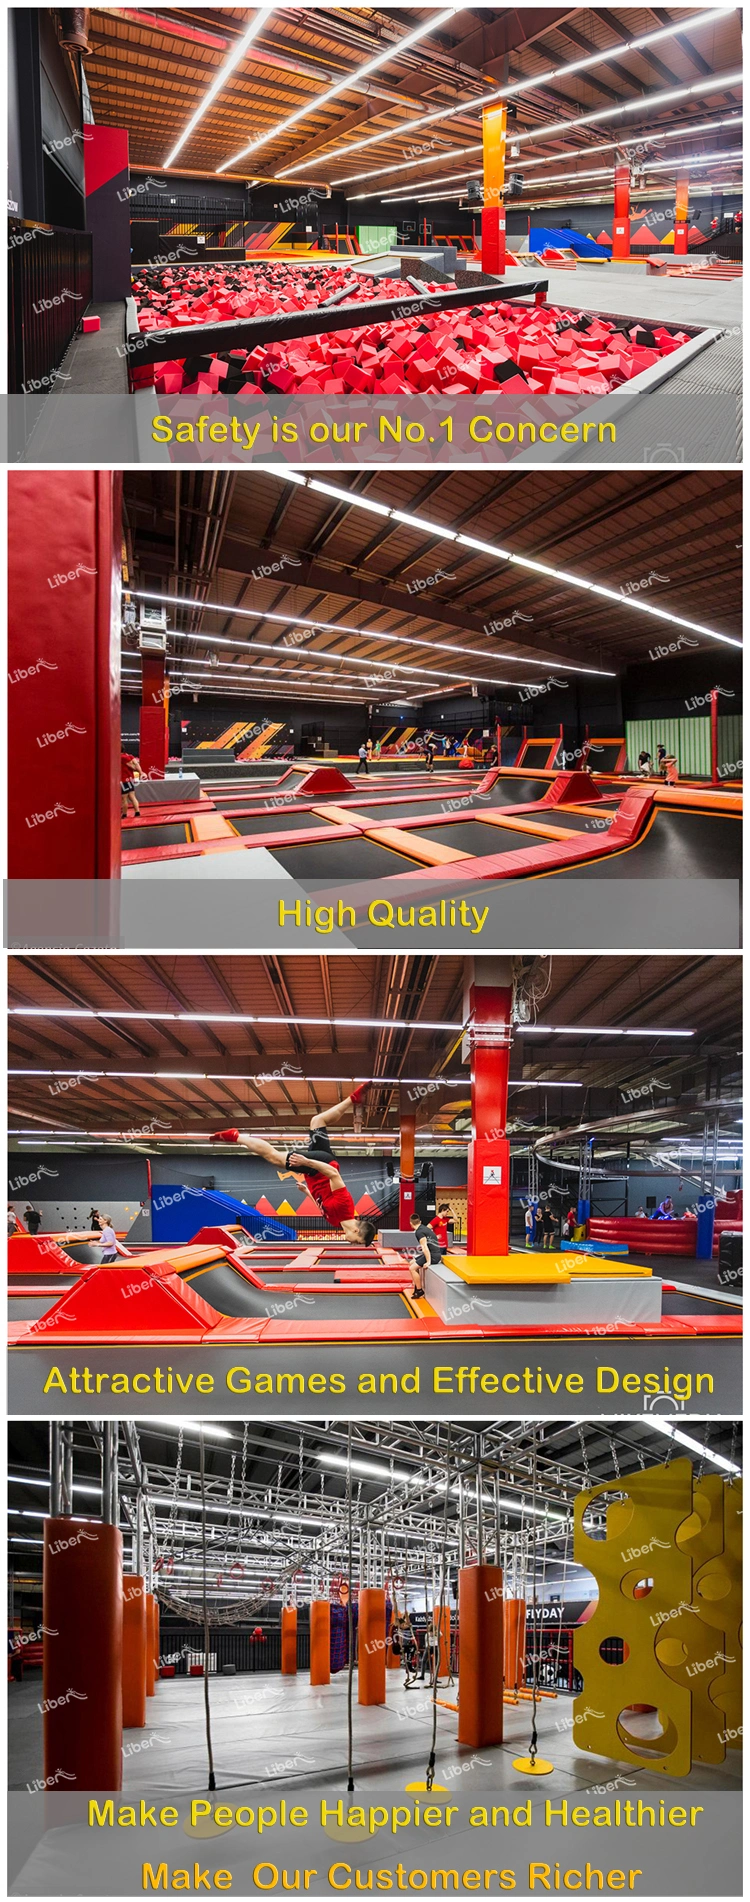 Rebounder Jumping Bed Indoor Trampoline Park with Ninja Warrior and Spider Tower